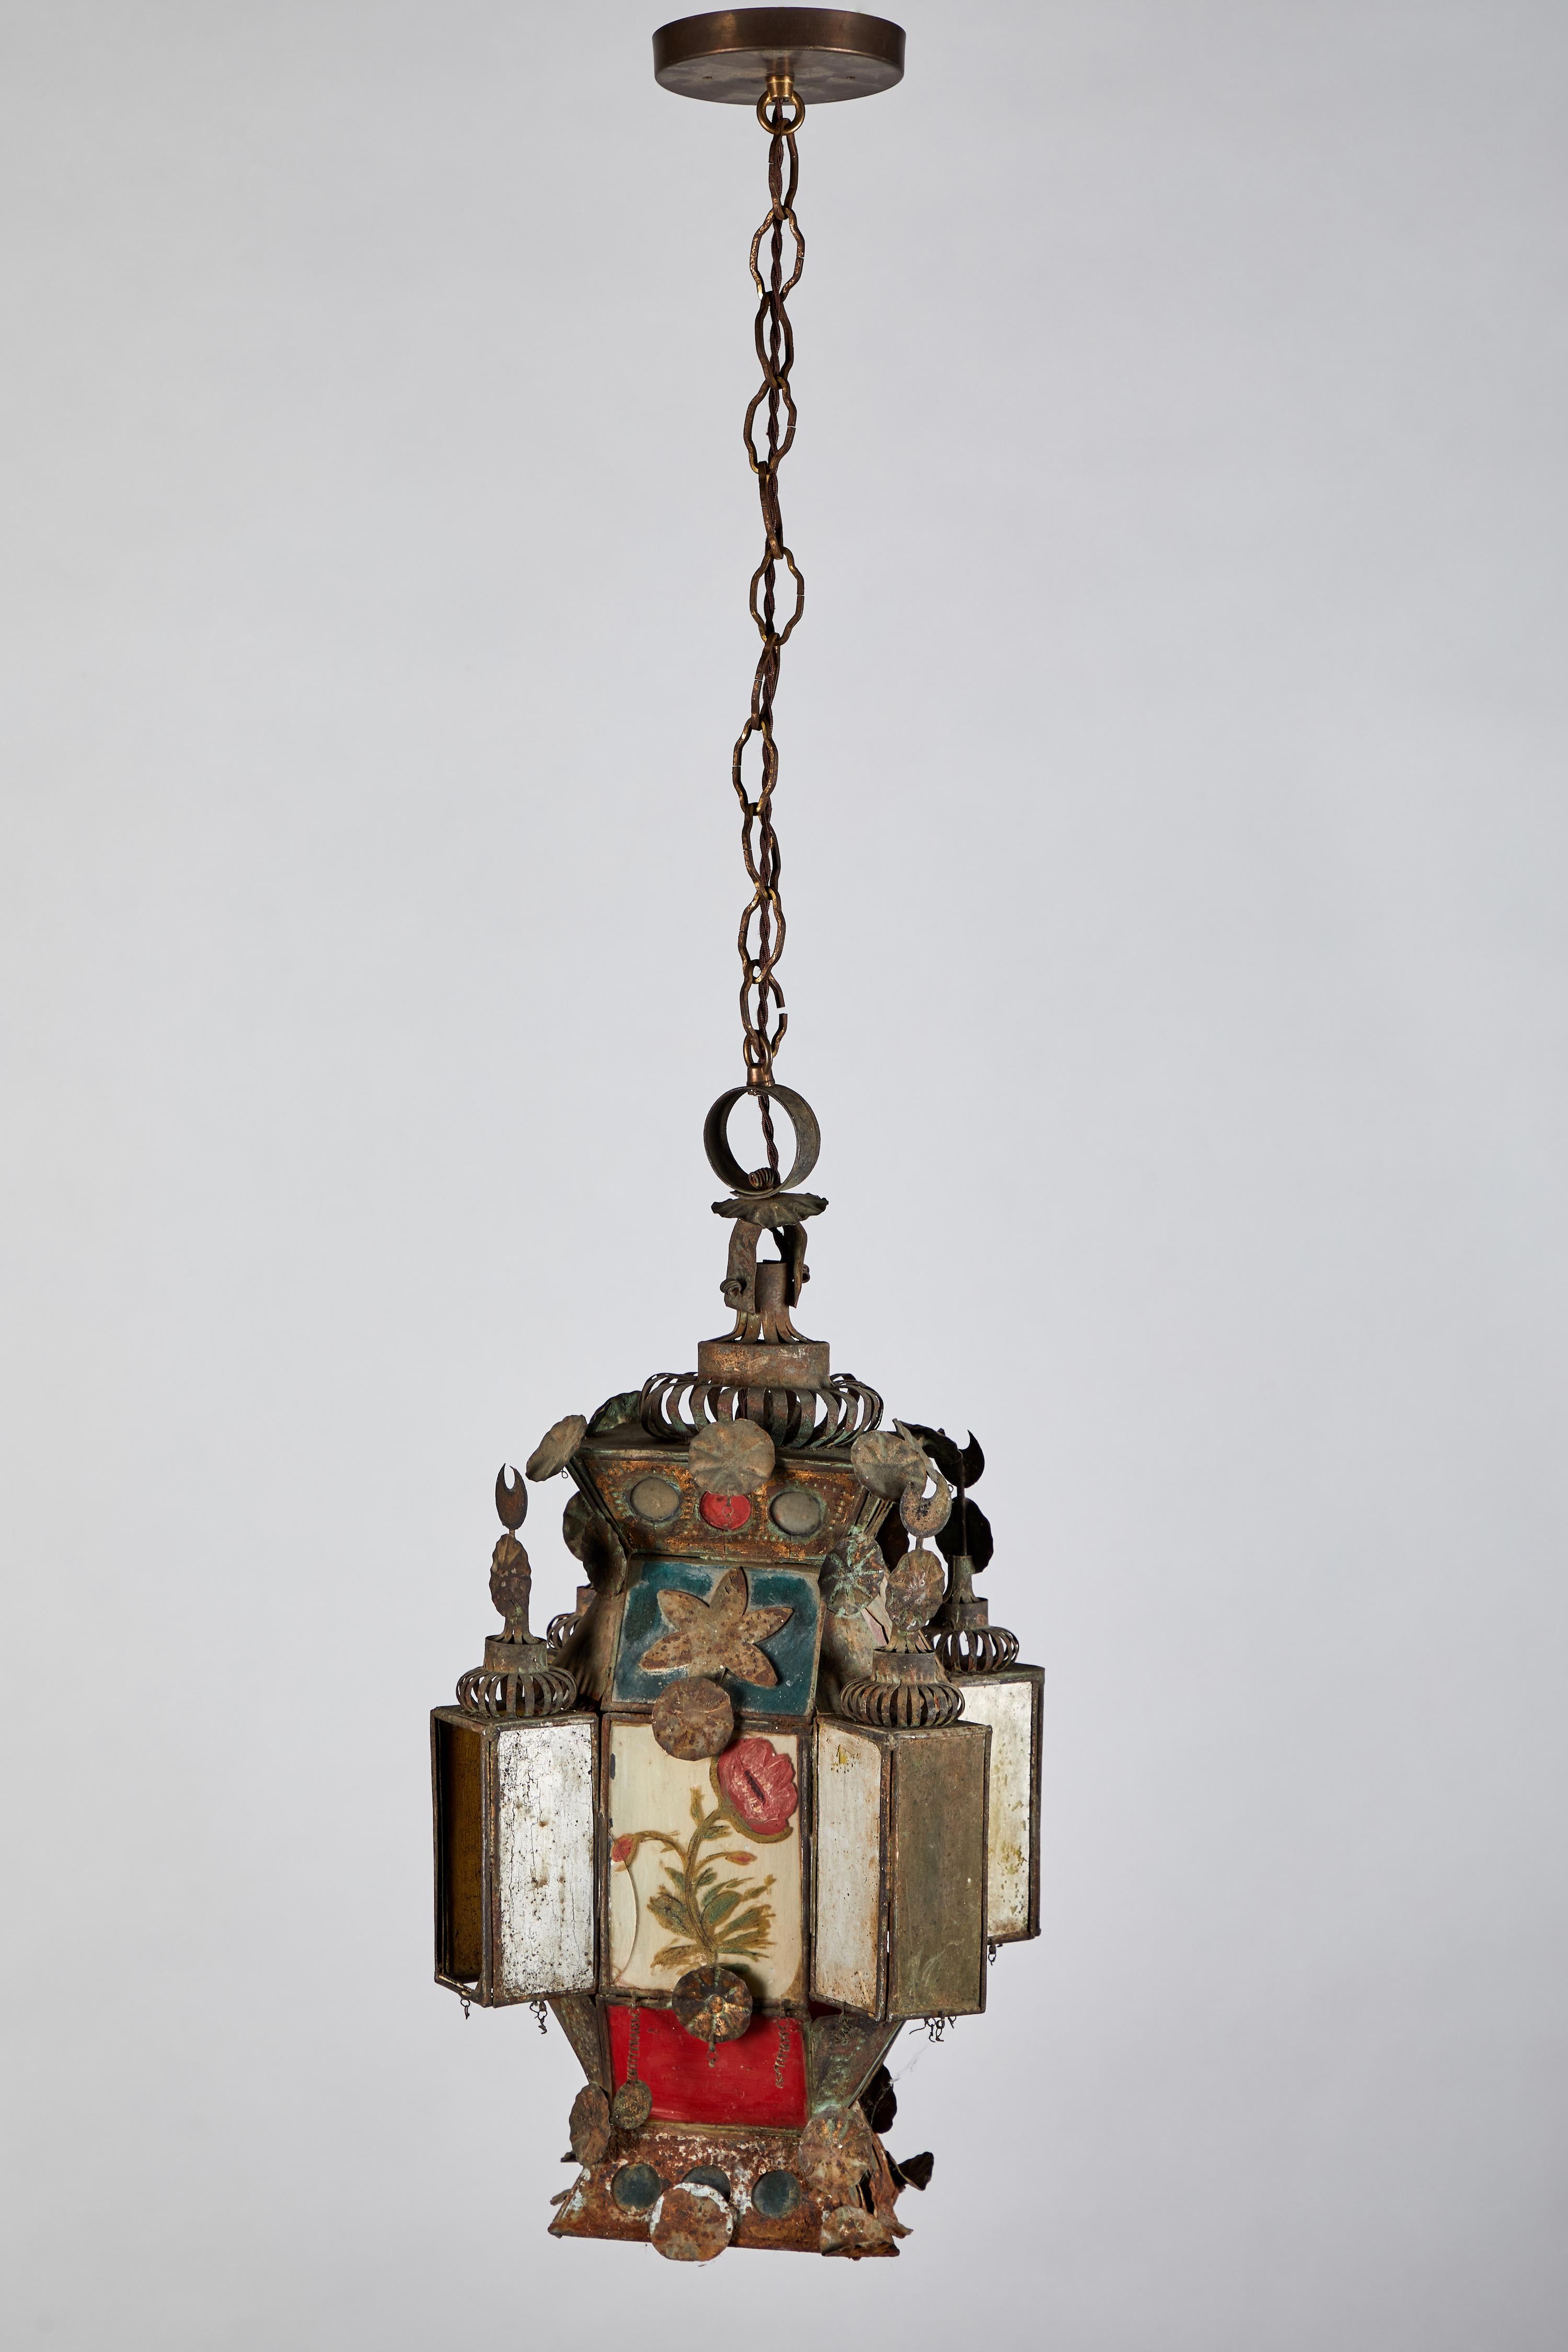 20th Century Vintage French Iron and Stained Glass Lantern